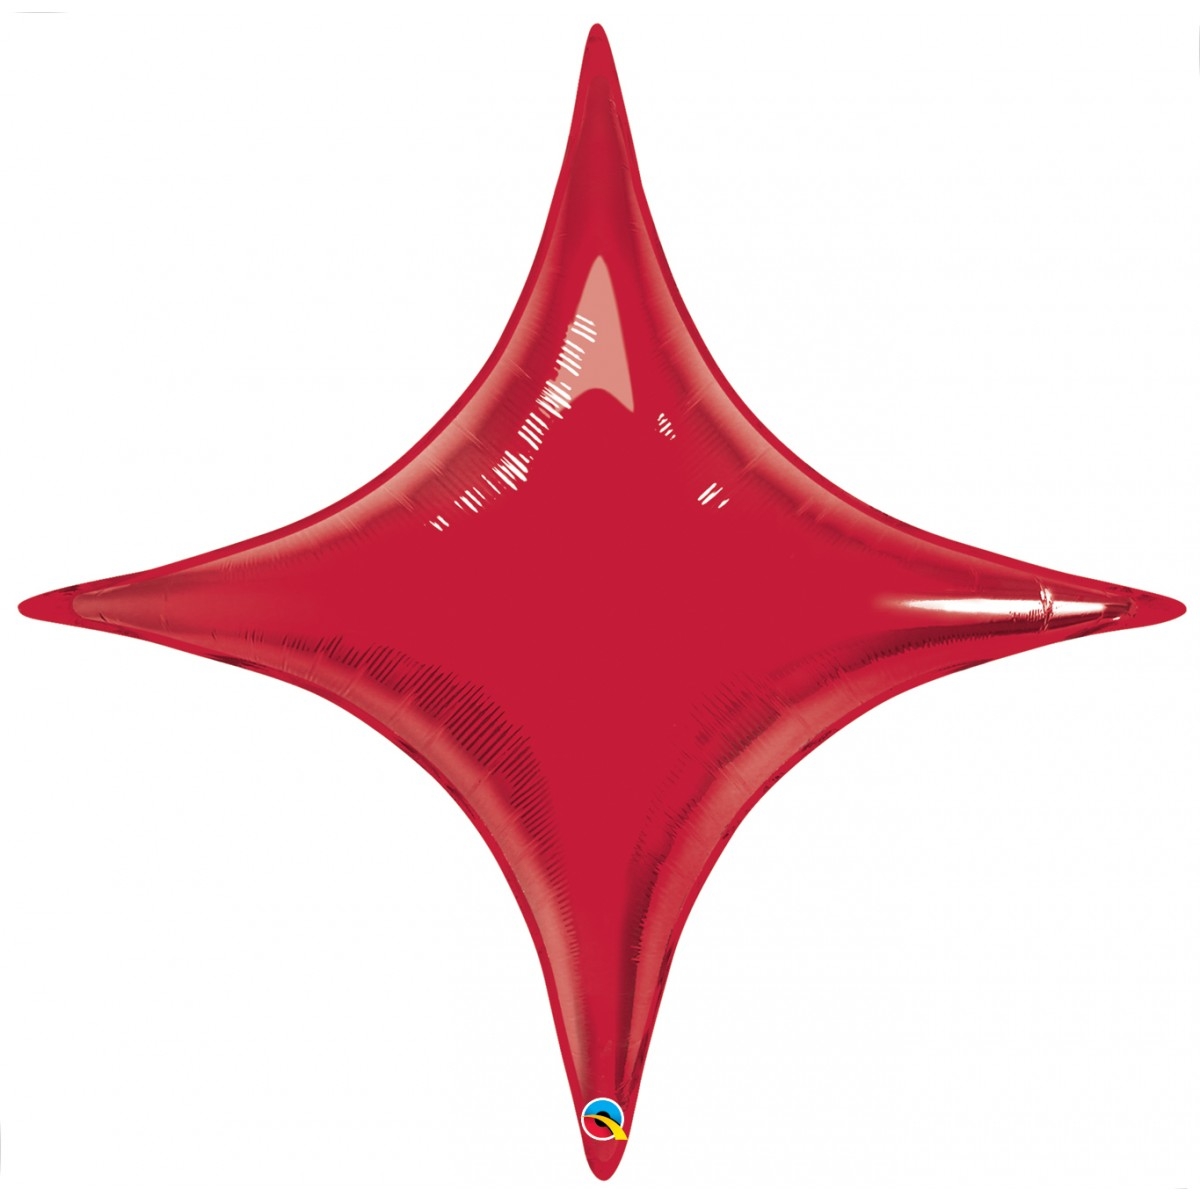 40" Shape - Starpoint - Ruby Red balloon